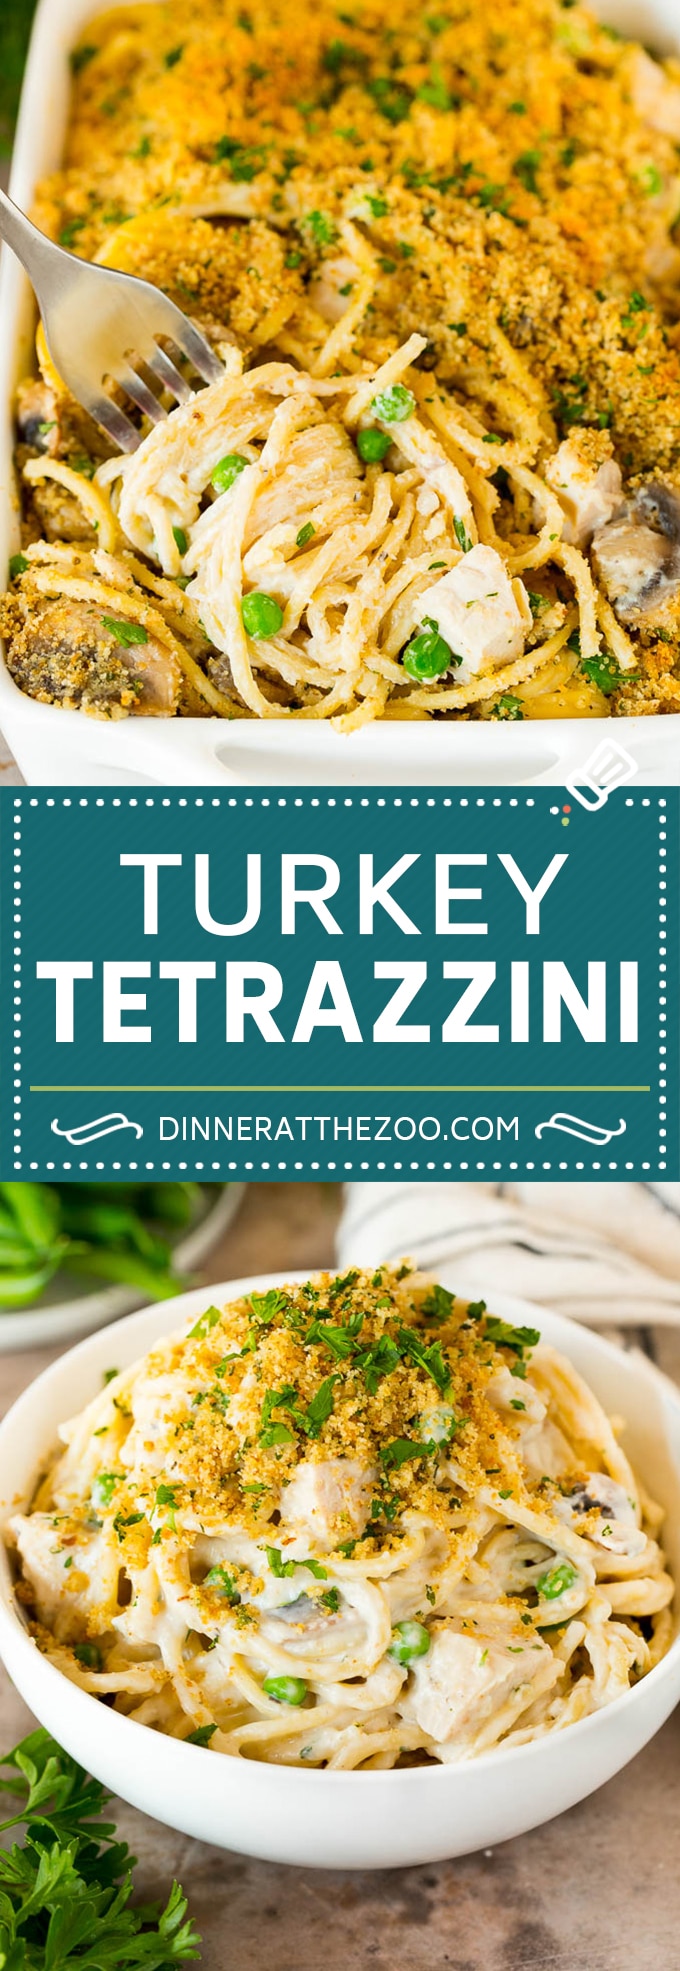 This turkey tetrazzini contains diced turkey, mushrooms and peas, all tossed with pasta in a creamy sauce, then baked to perfection.